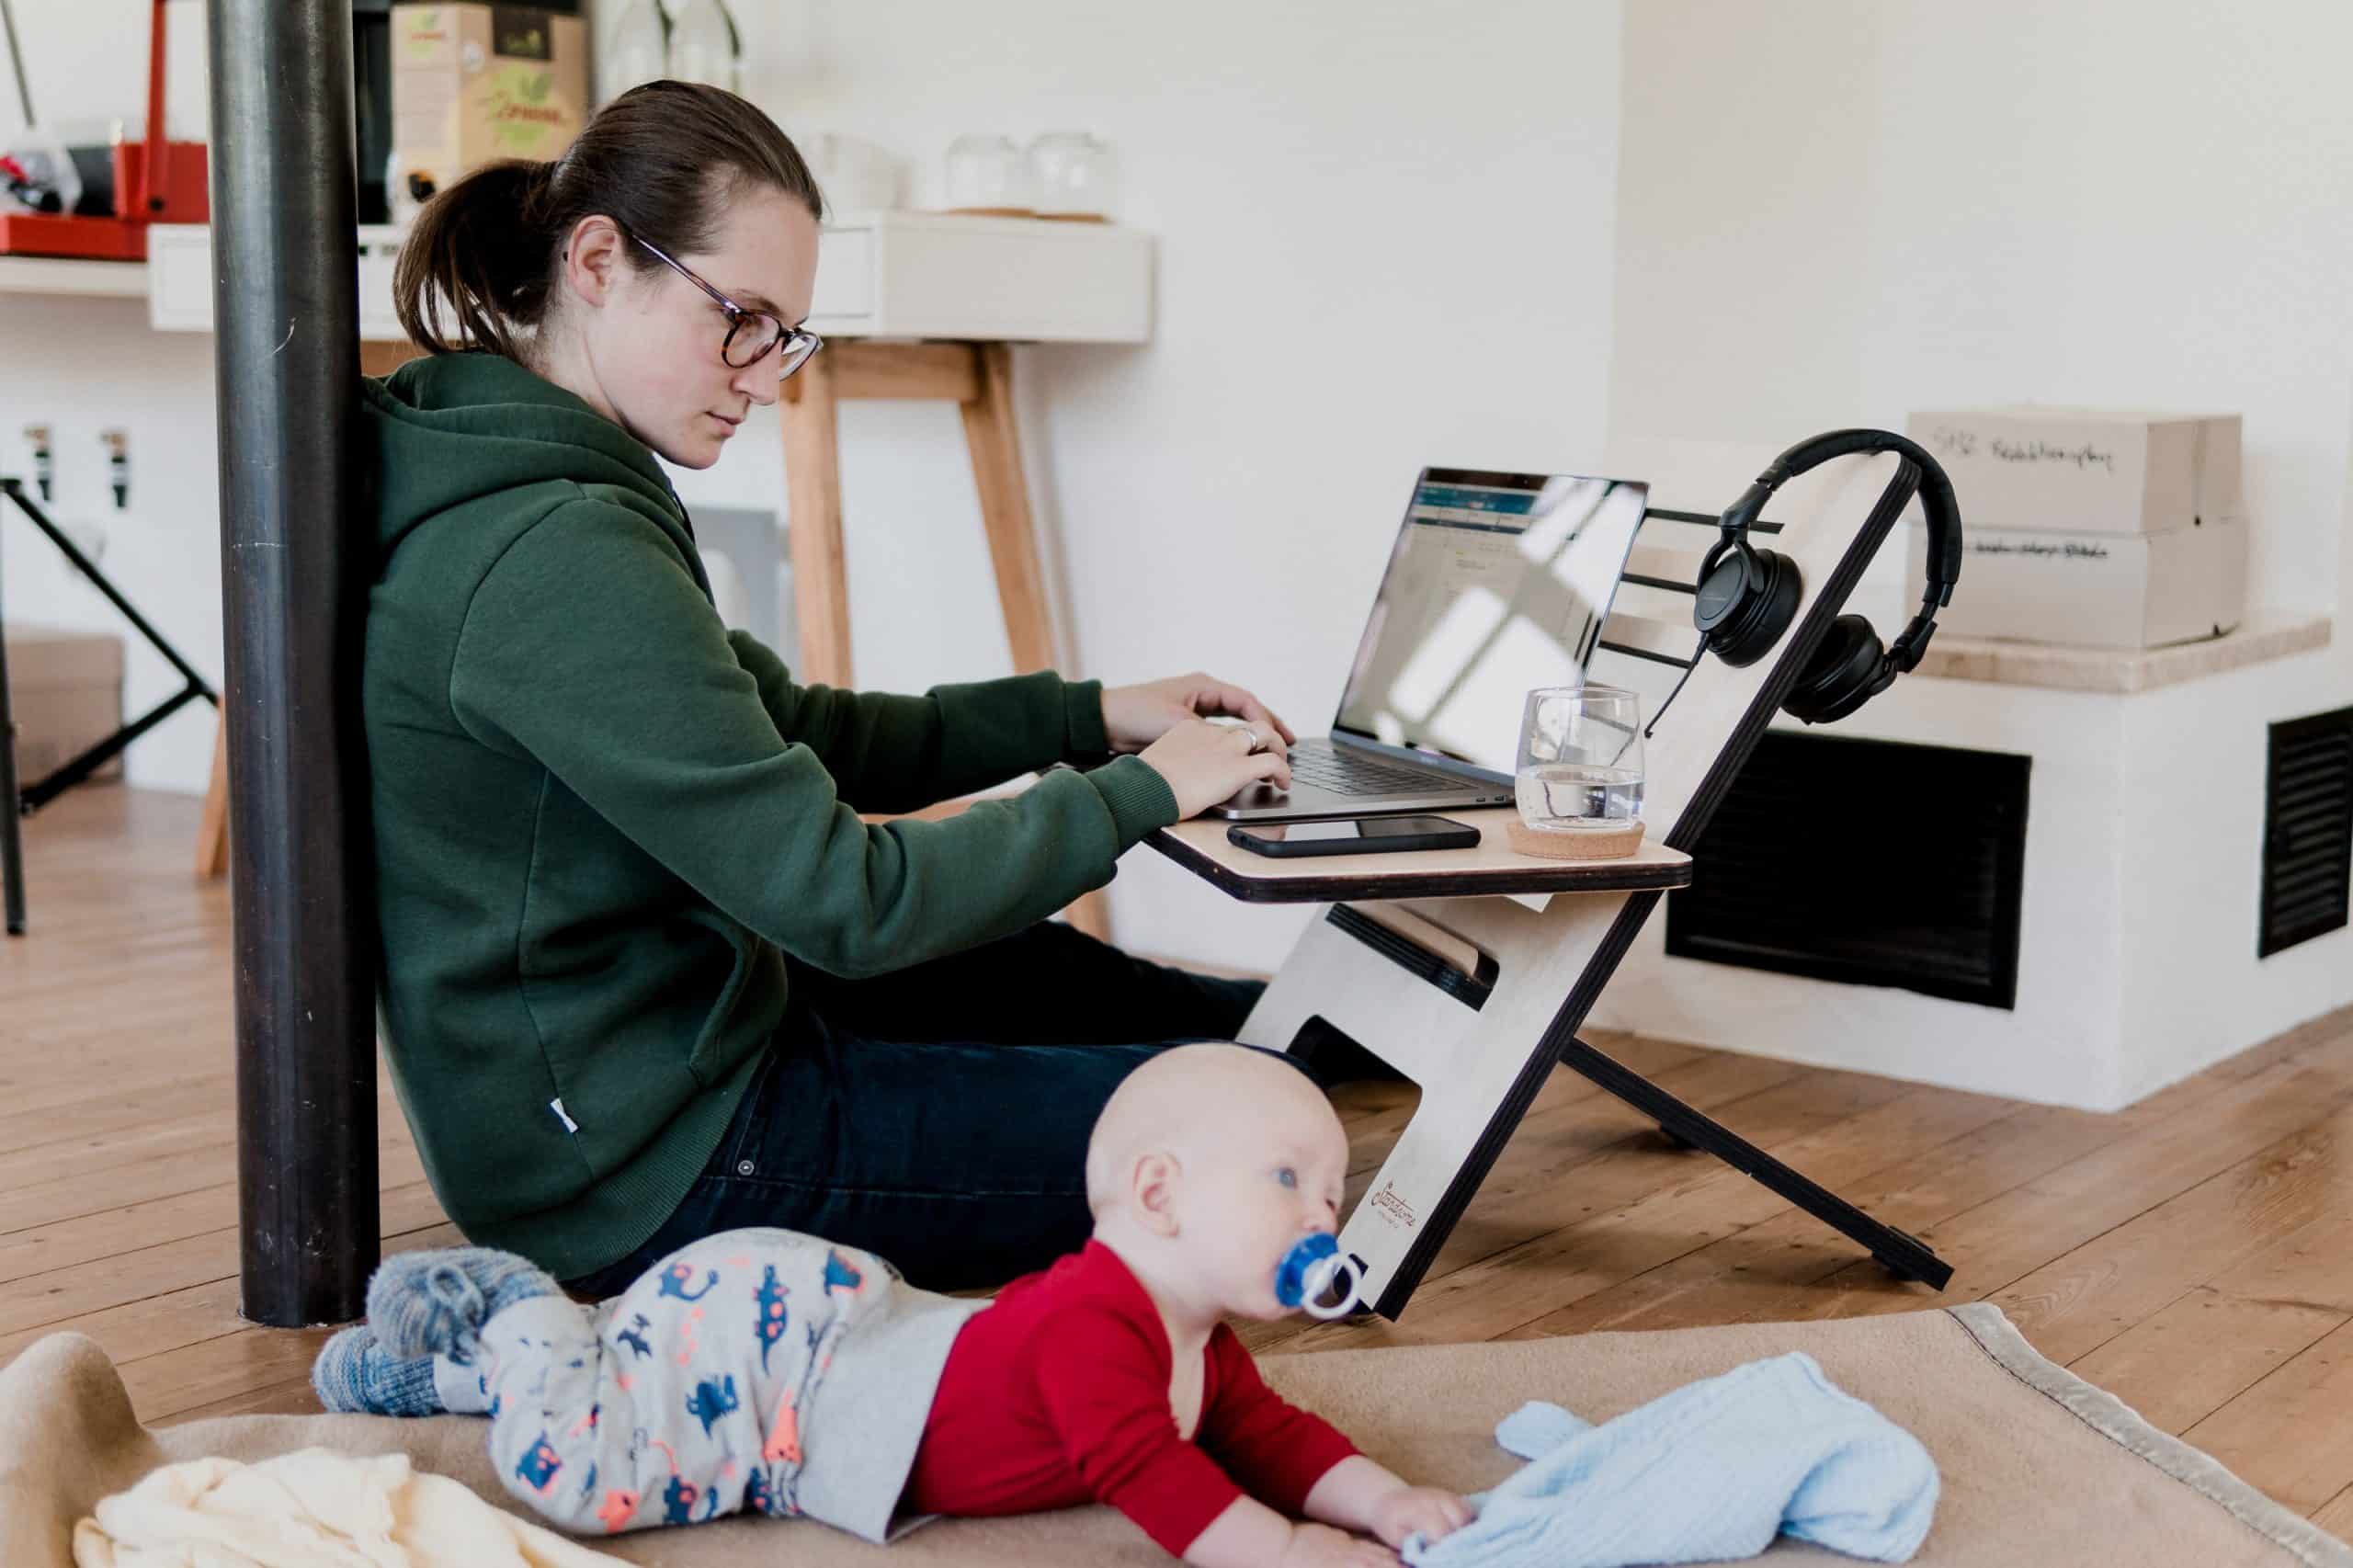 Image of someone completing work for an online college degree, while watching a baby next to them